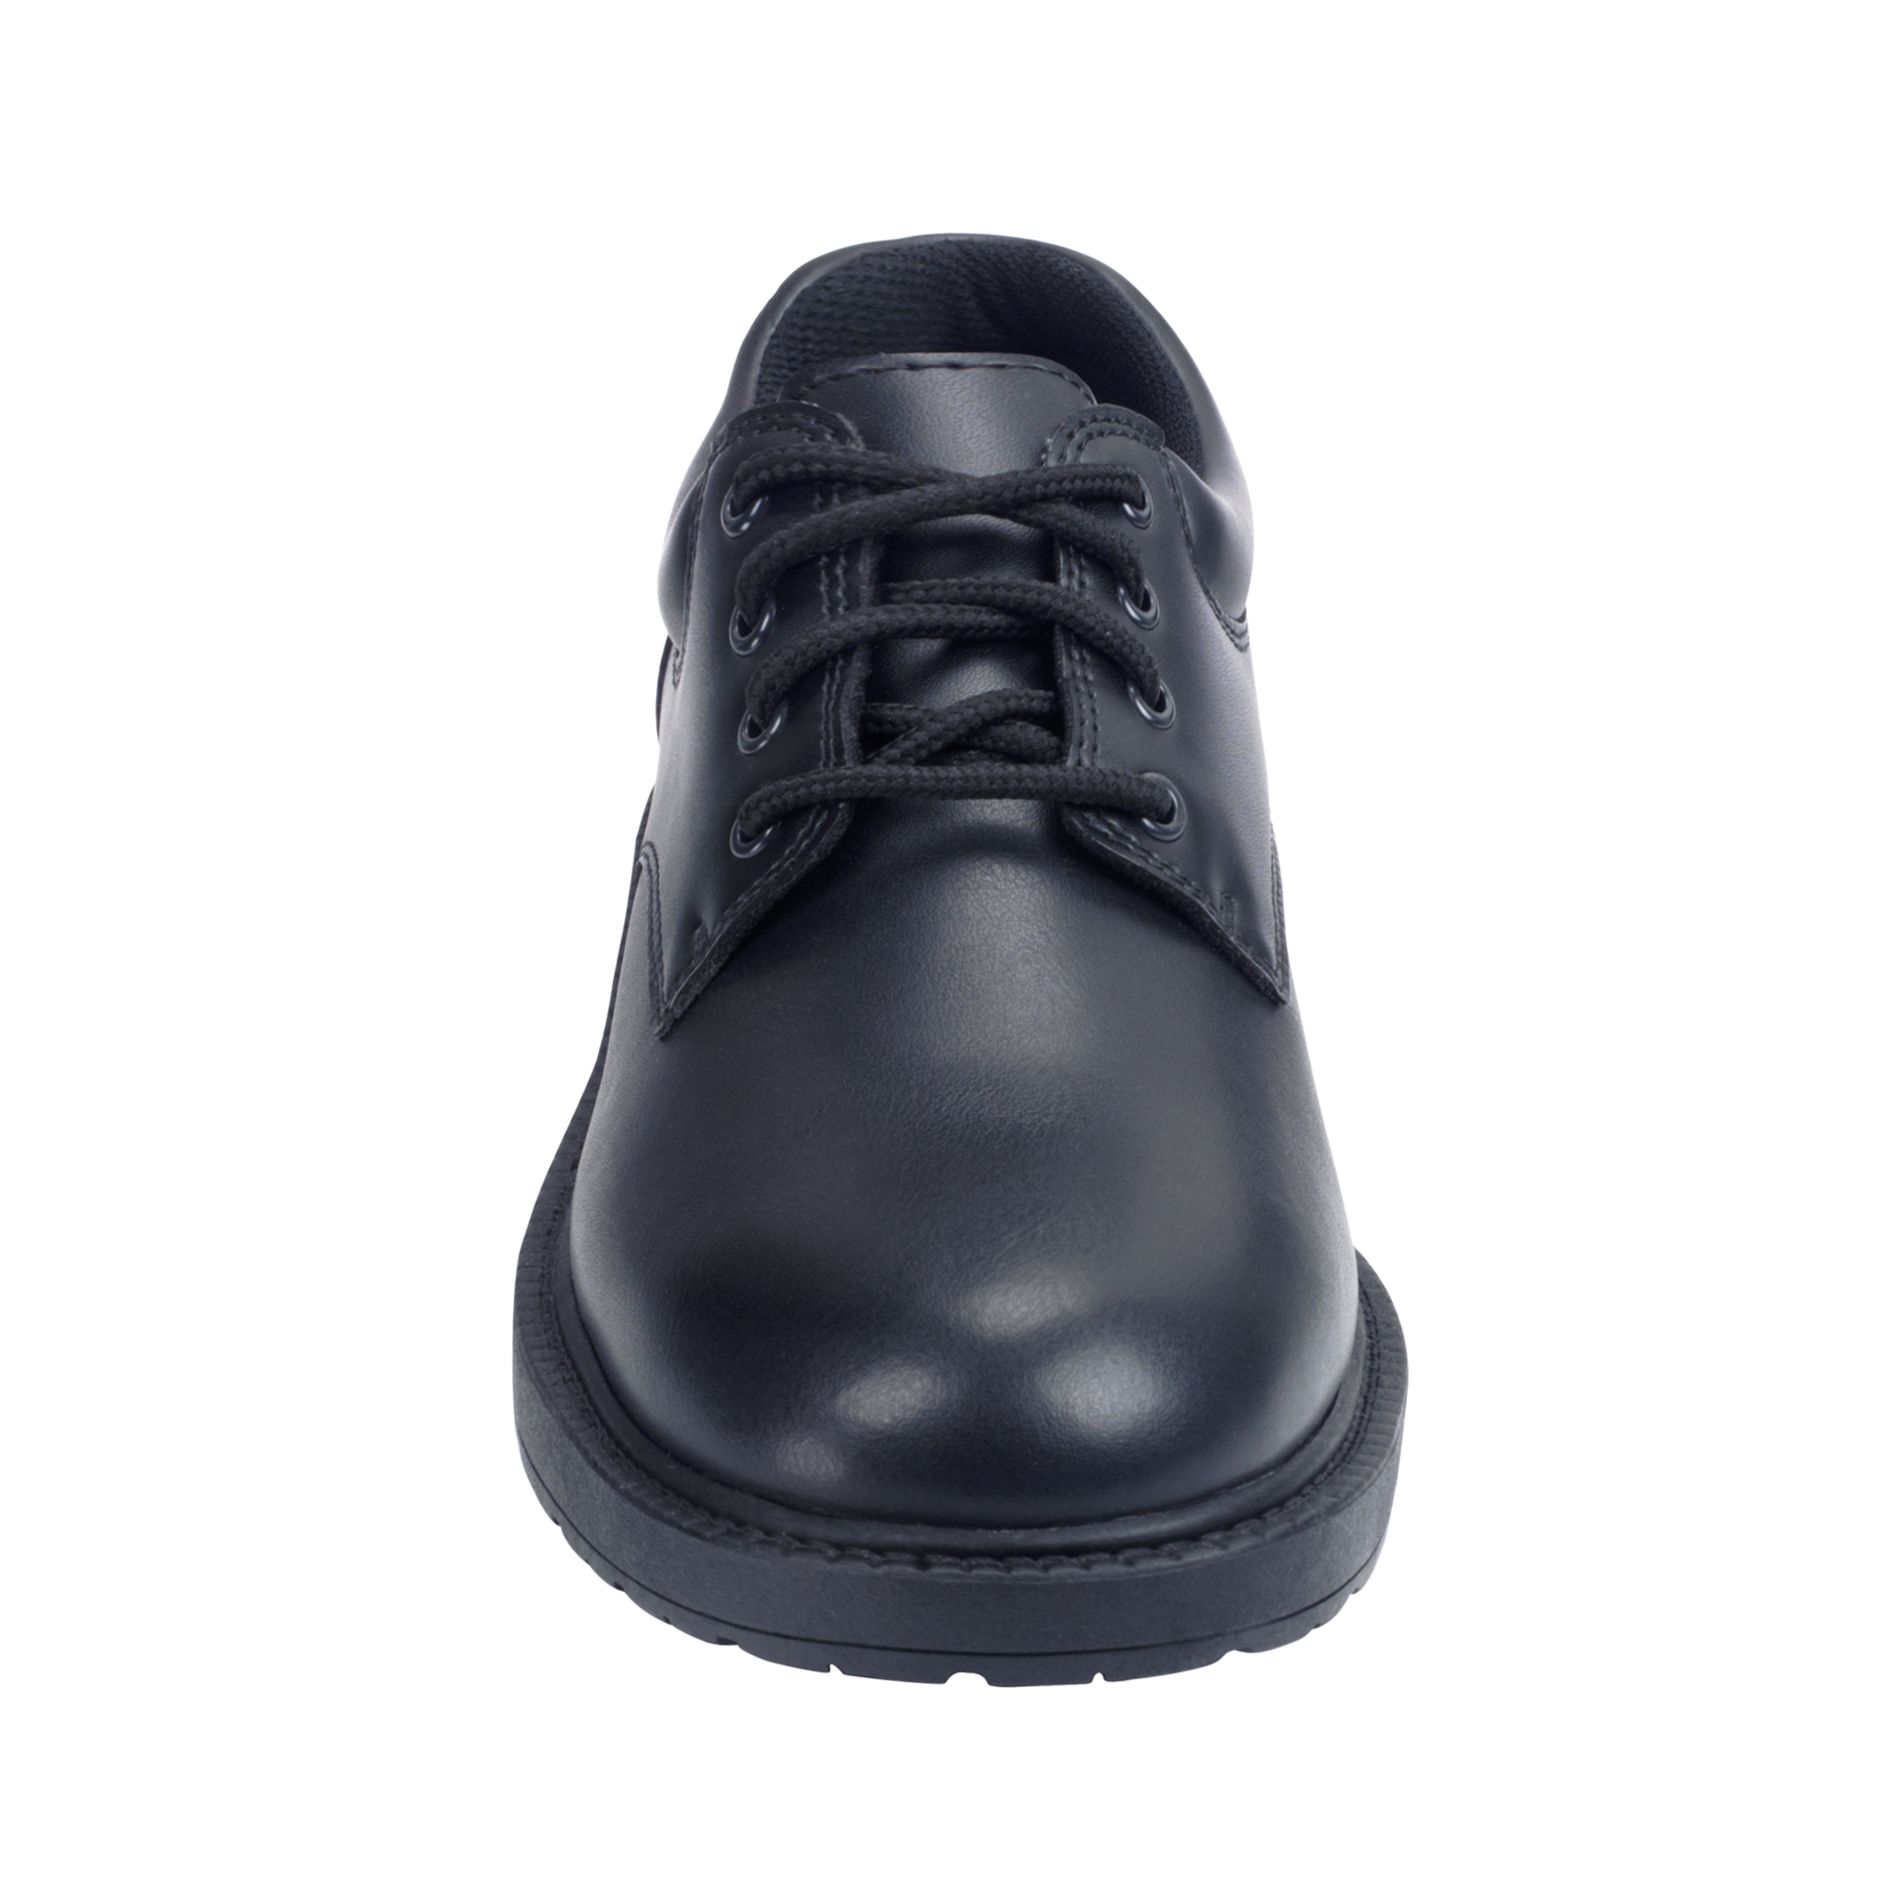 leather non skid shoes